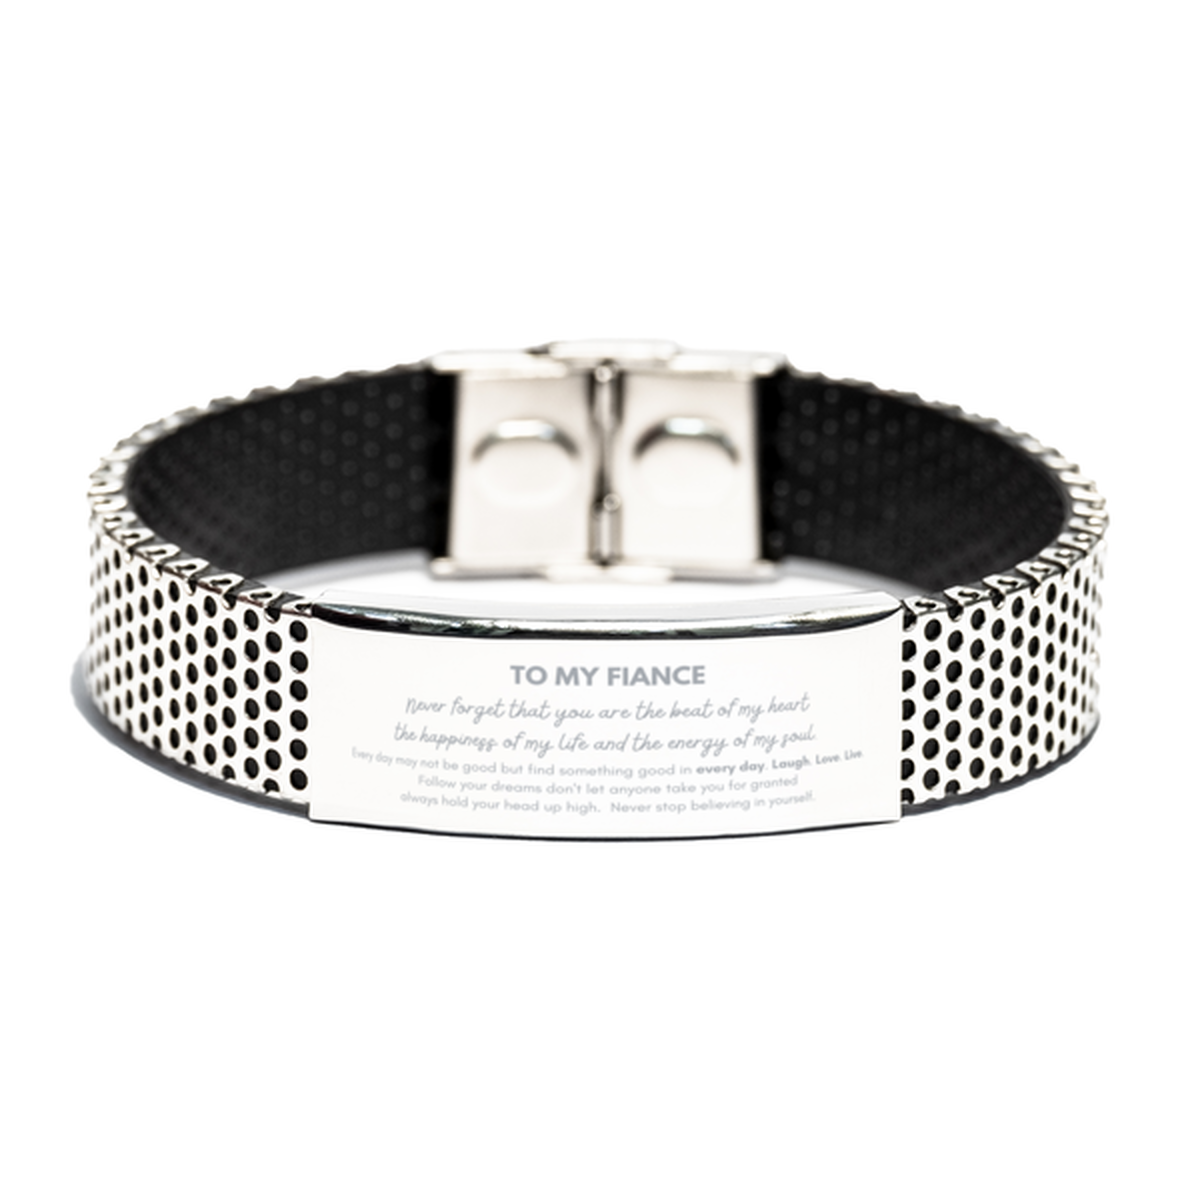 To My Fiance Bracelet Gifts, Christmas Fiance Stainless Steel Bracelet Present, Birthday Unique Motivational For Fiance, To My Fiance Never forget that you are the beat of my heart the happiness of my life and the energy of my soul